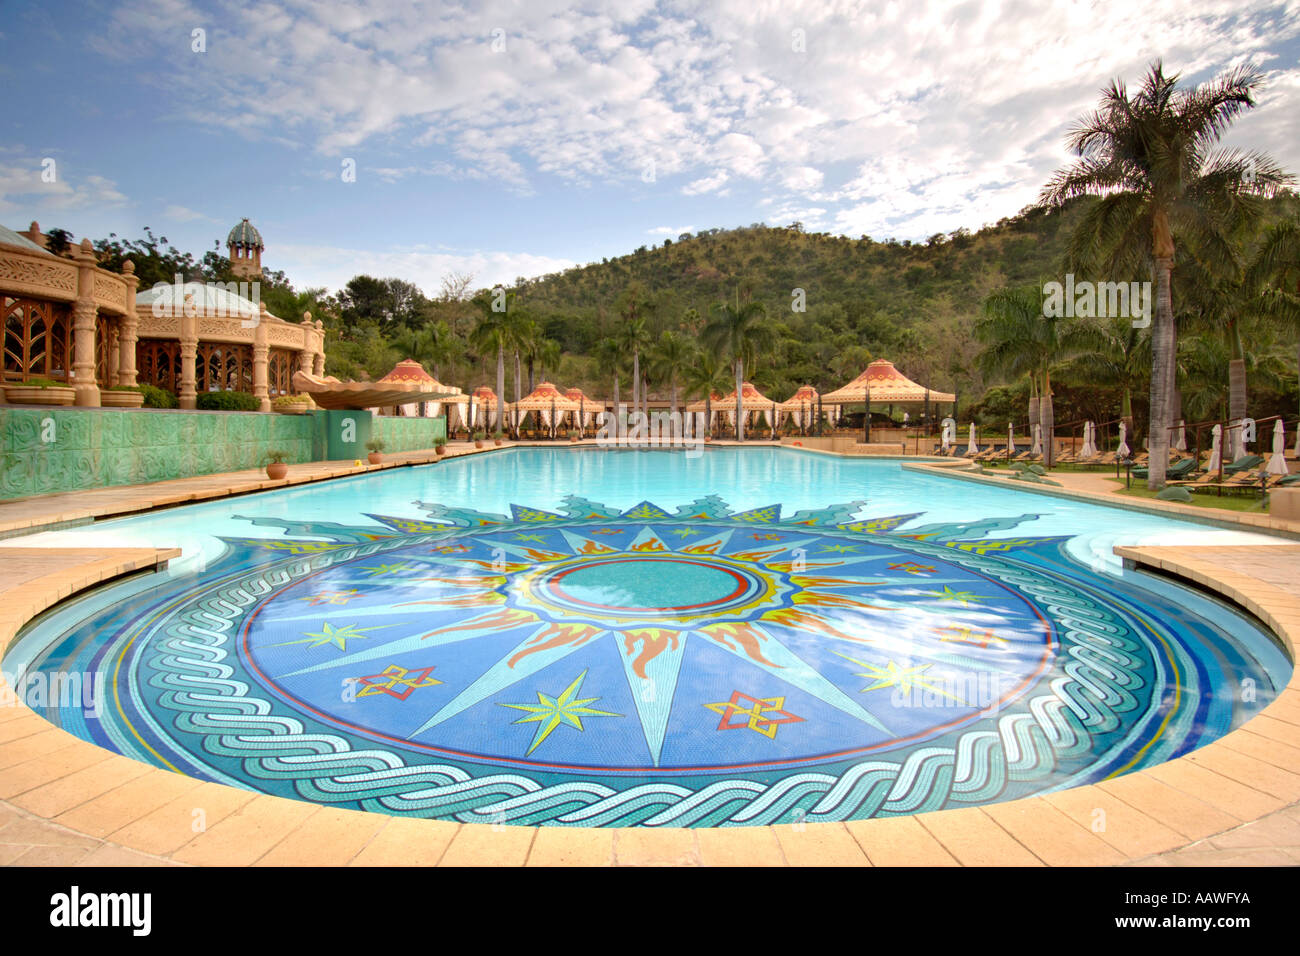 A dawn view of the swimming pool outside the Palace of the Lost City hotel in the Sun City resort in South Africa. Stock Photo